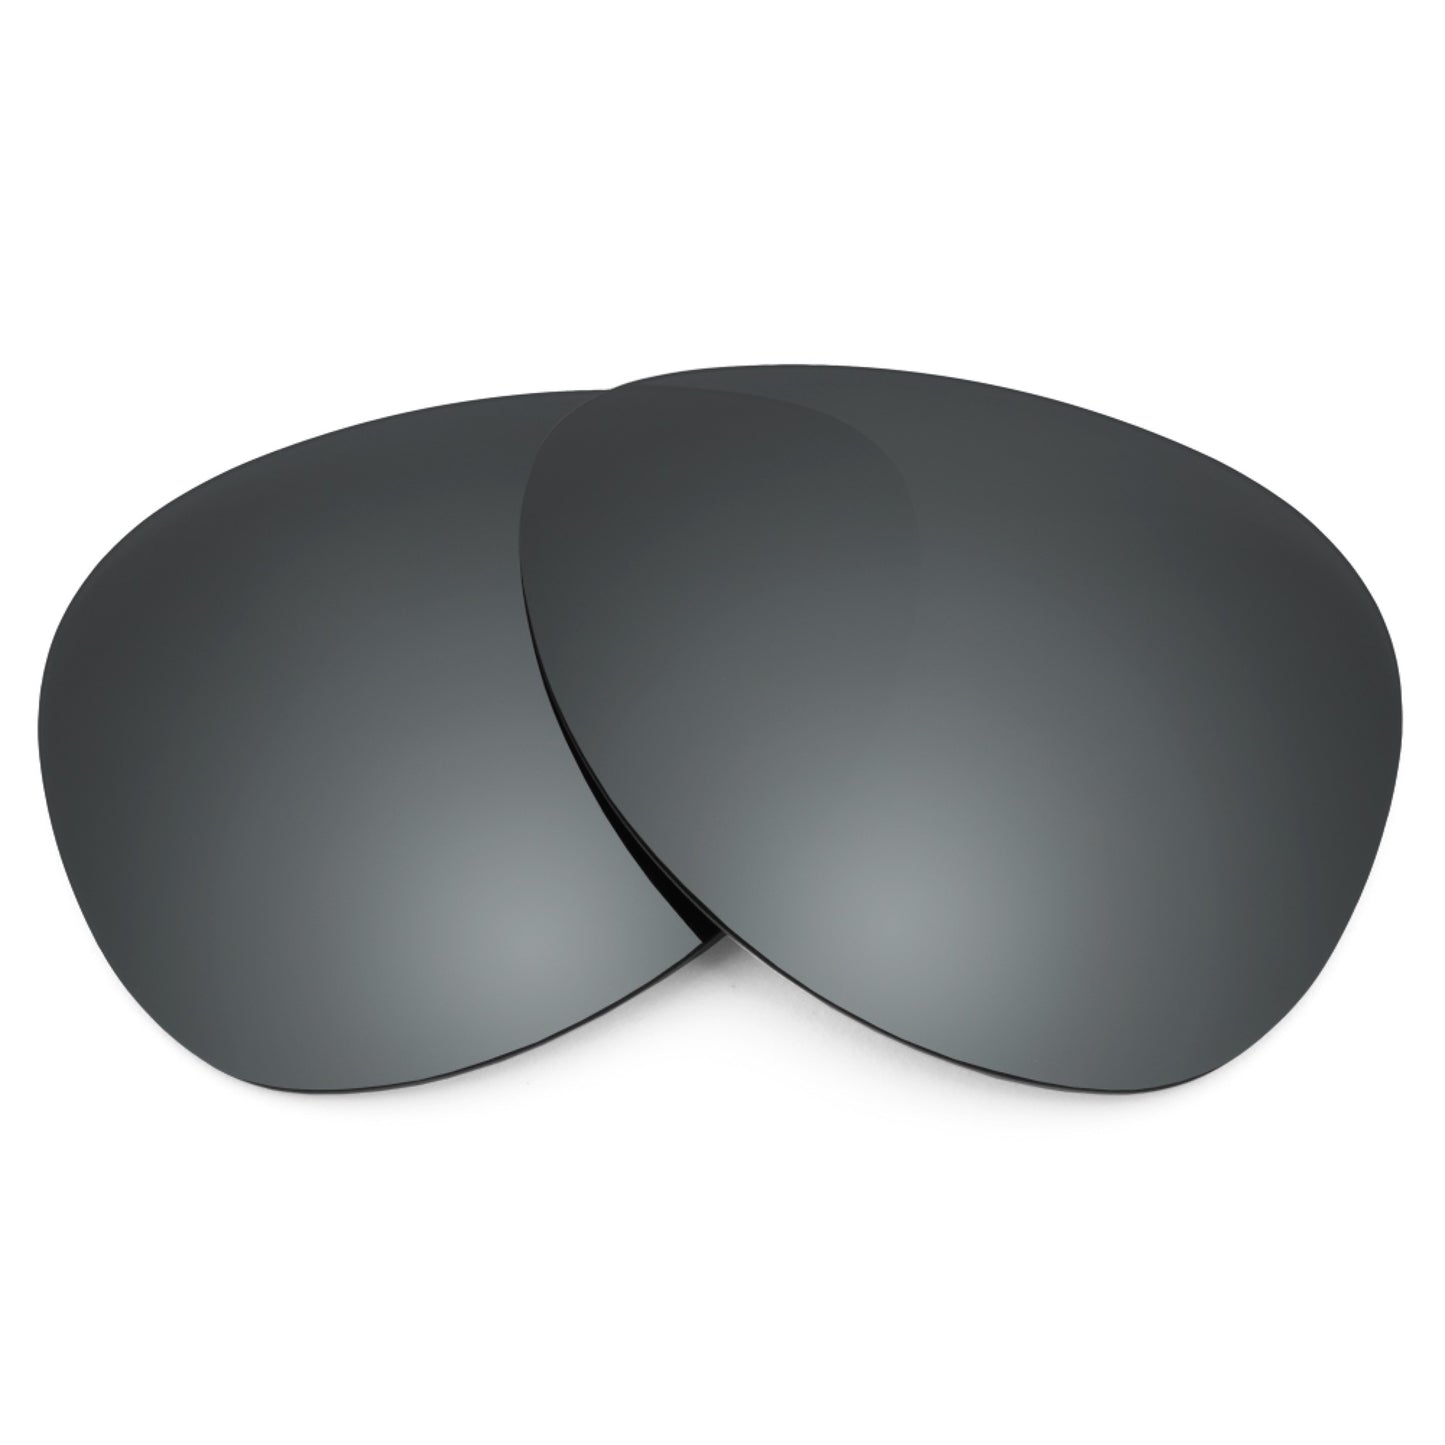 Revant replacement lenses for Ray-Ban RB4147 60mm Non-Polarized Black Chrome